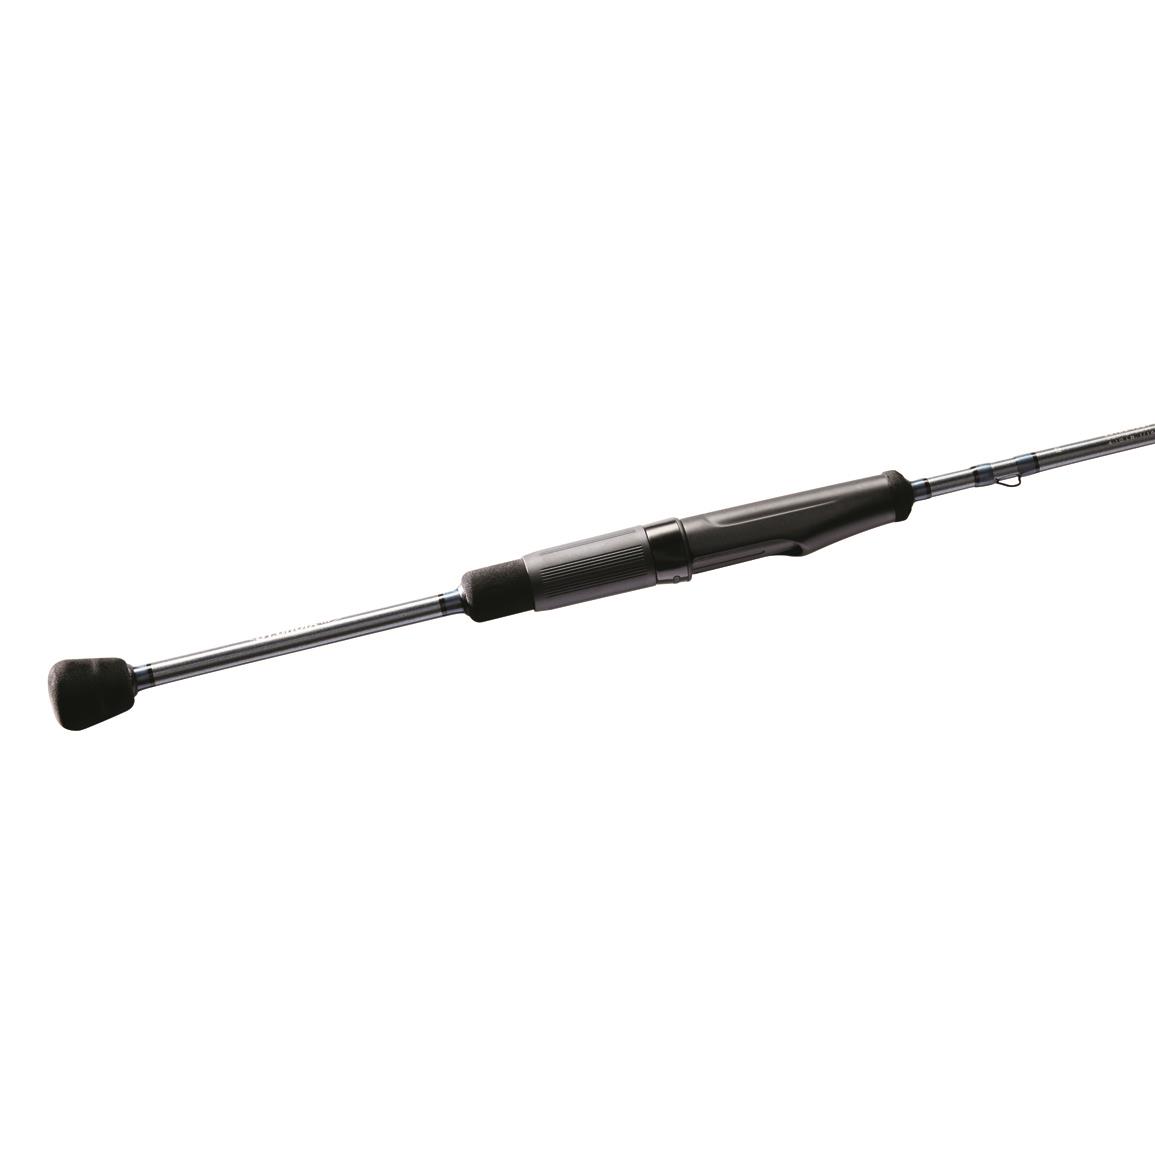 St. Croix Trout Series Spinning Rod, 7' Length, Medium Power, X-Fast Action, 2 Pieces